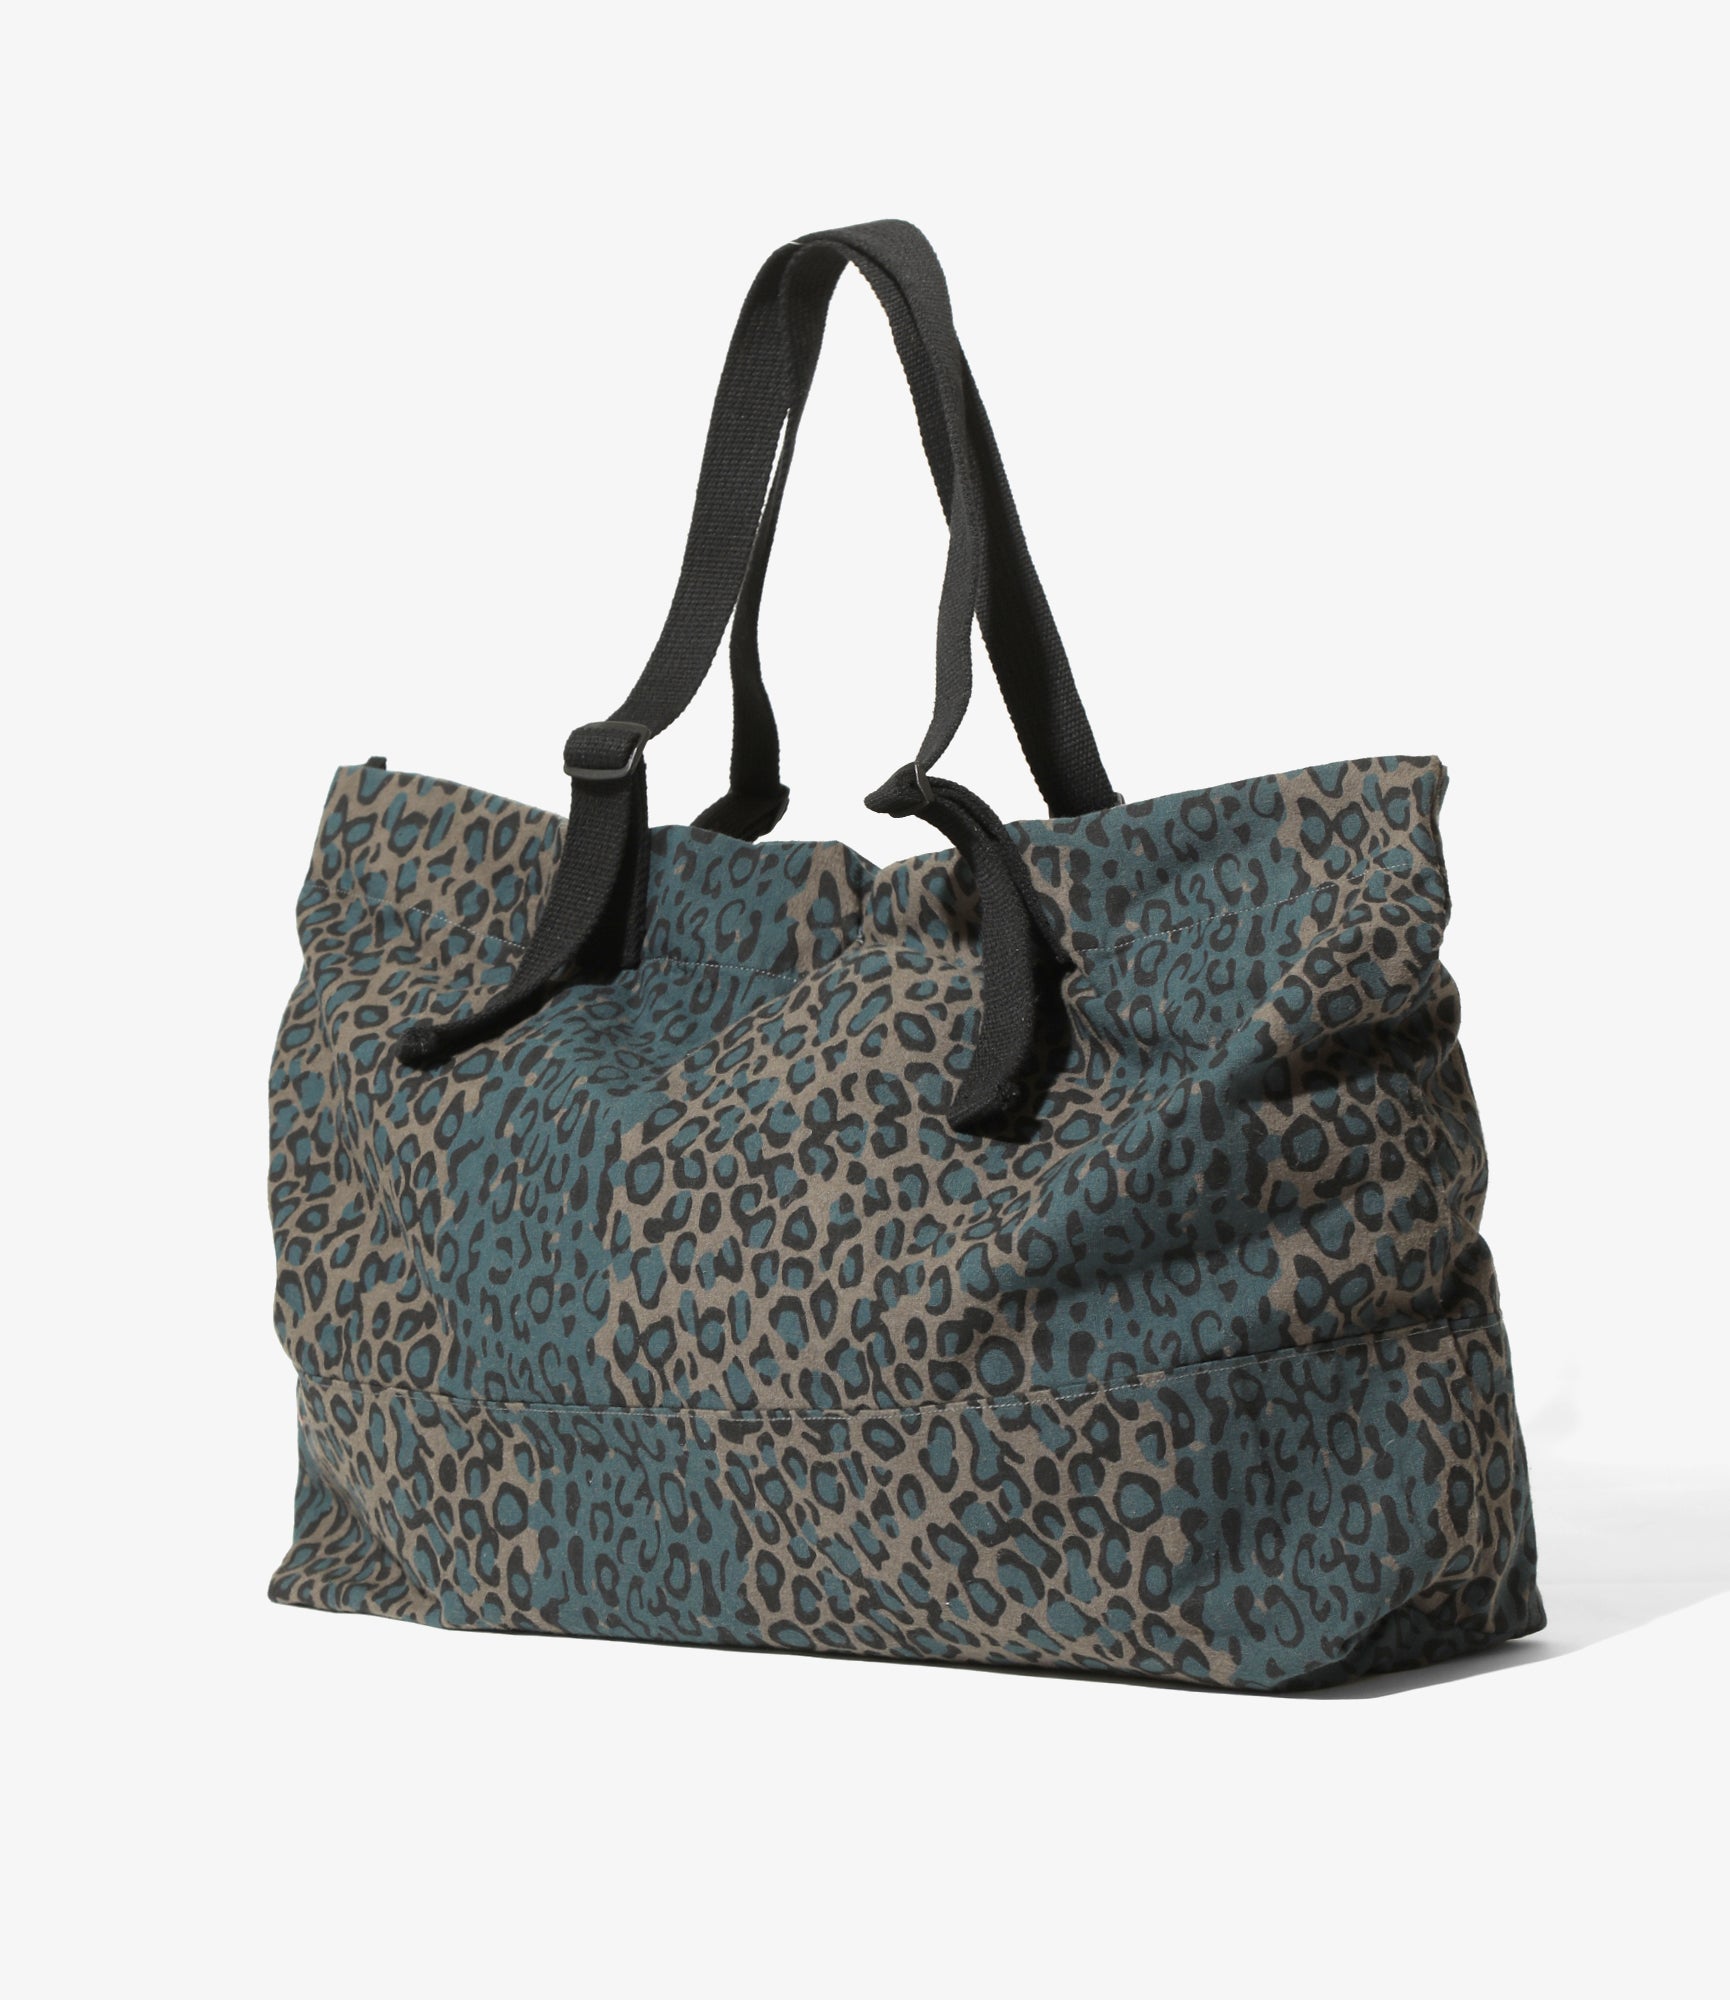 South2 West8 Canal Park Tote - Flannel Cloth / Printed - Leopard